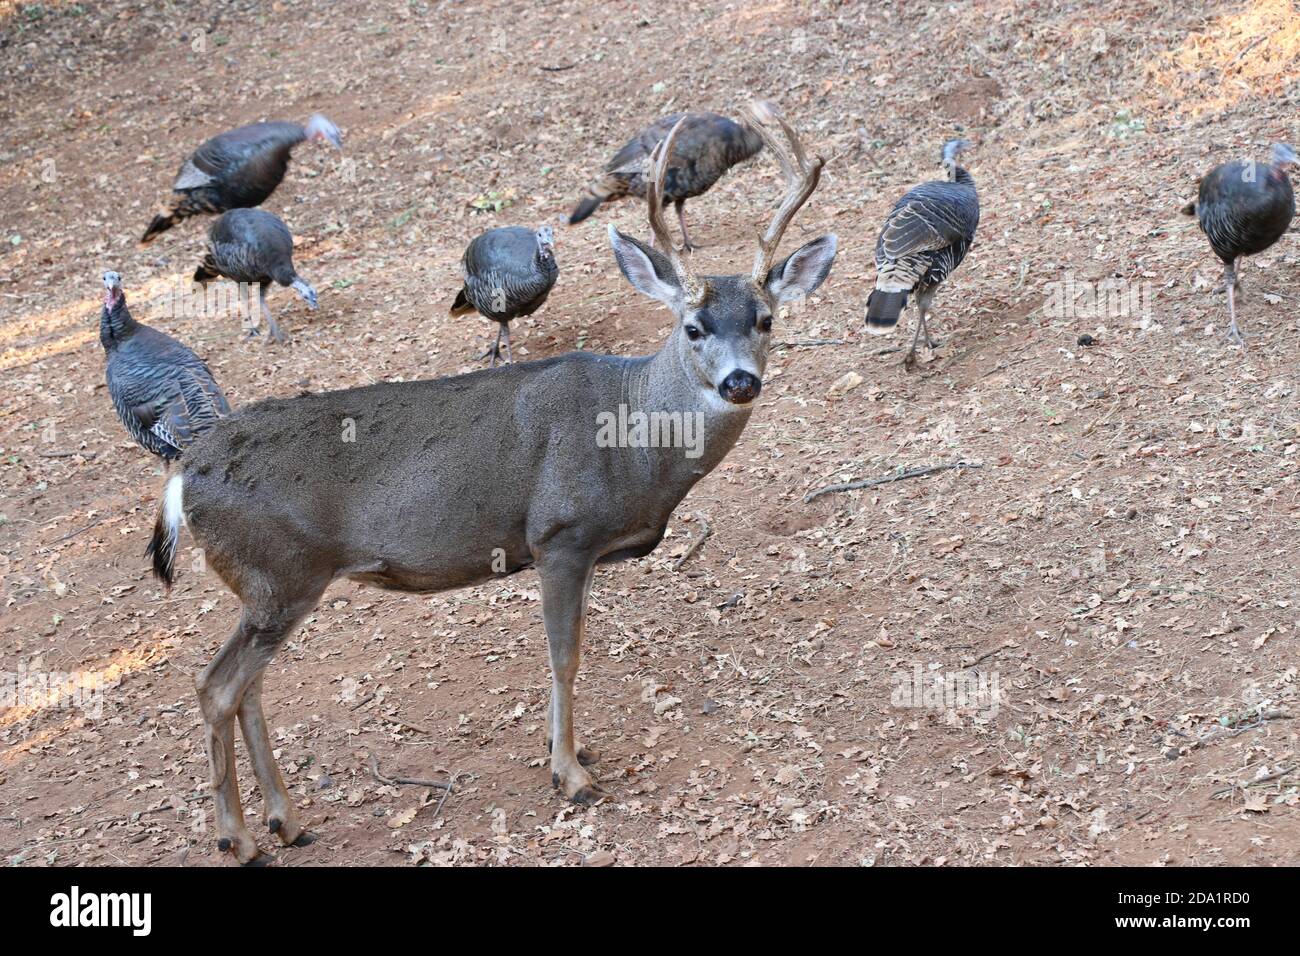 A buck with large antlers stands in a field, surrounded by wild turkeys. Stock Photo